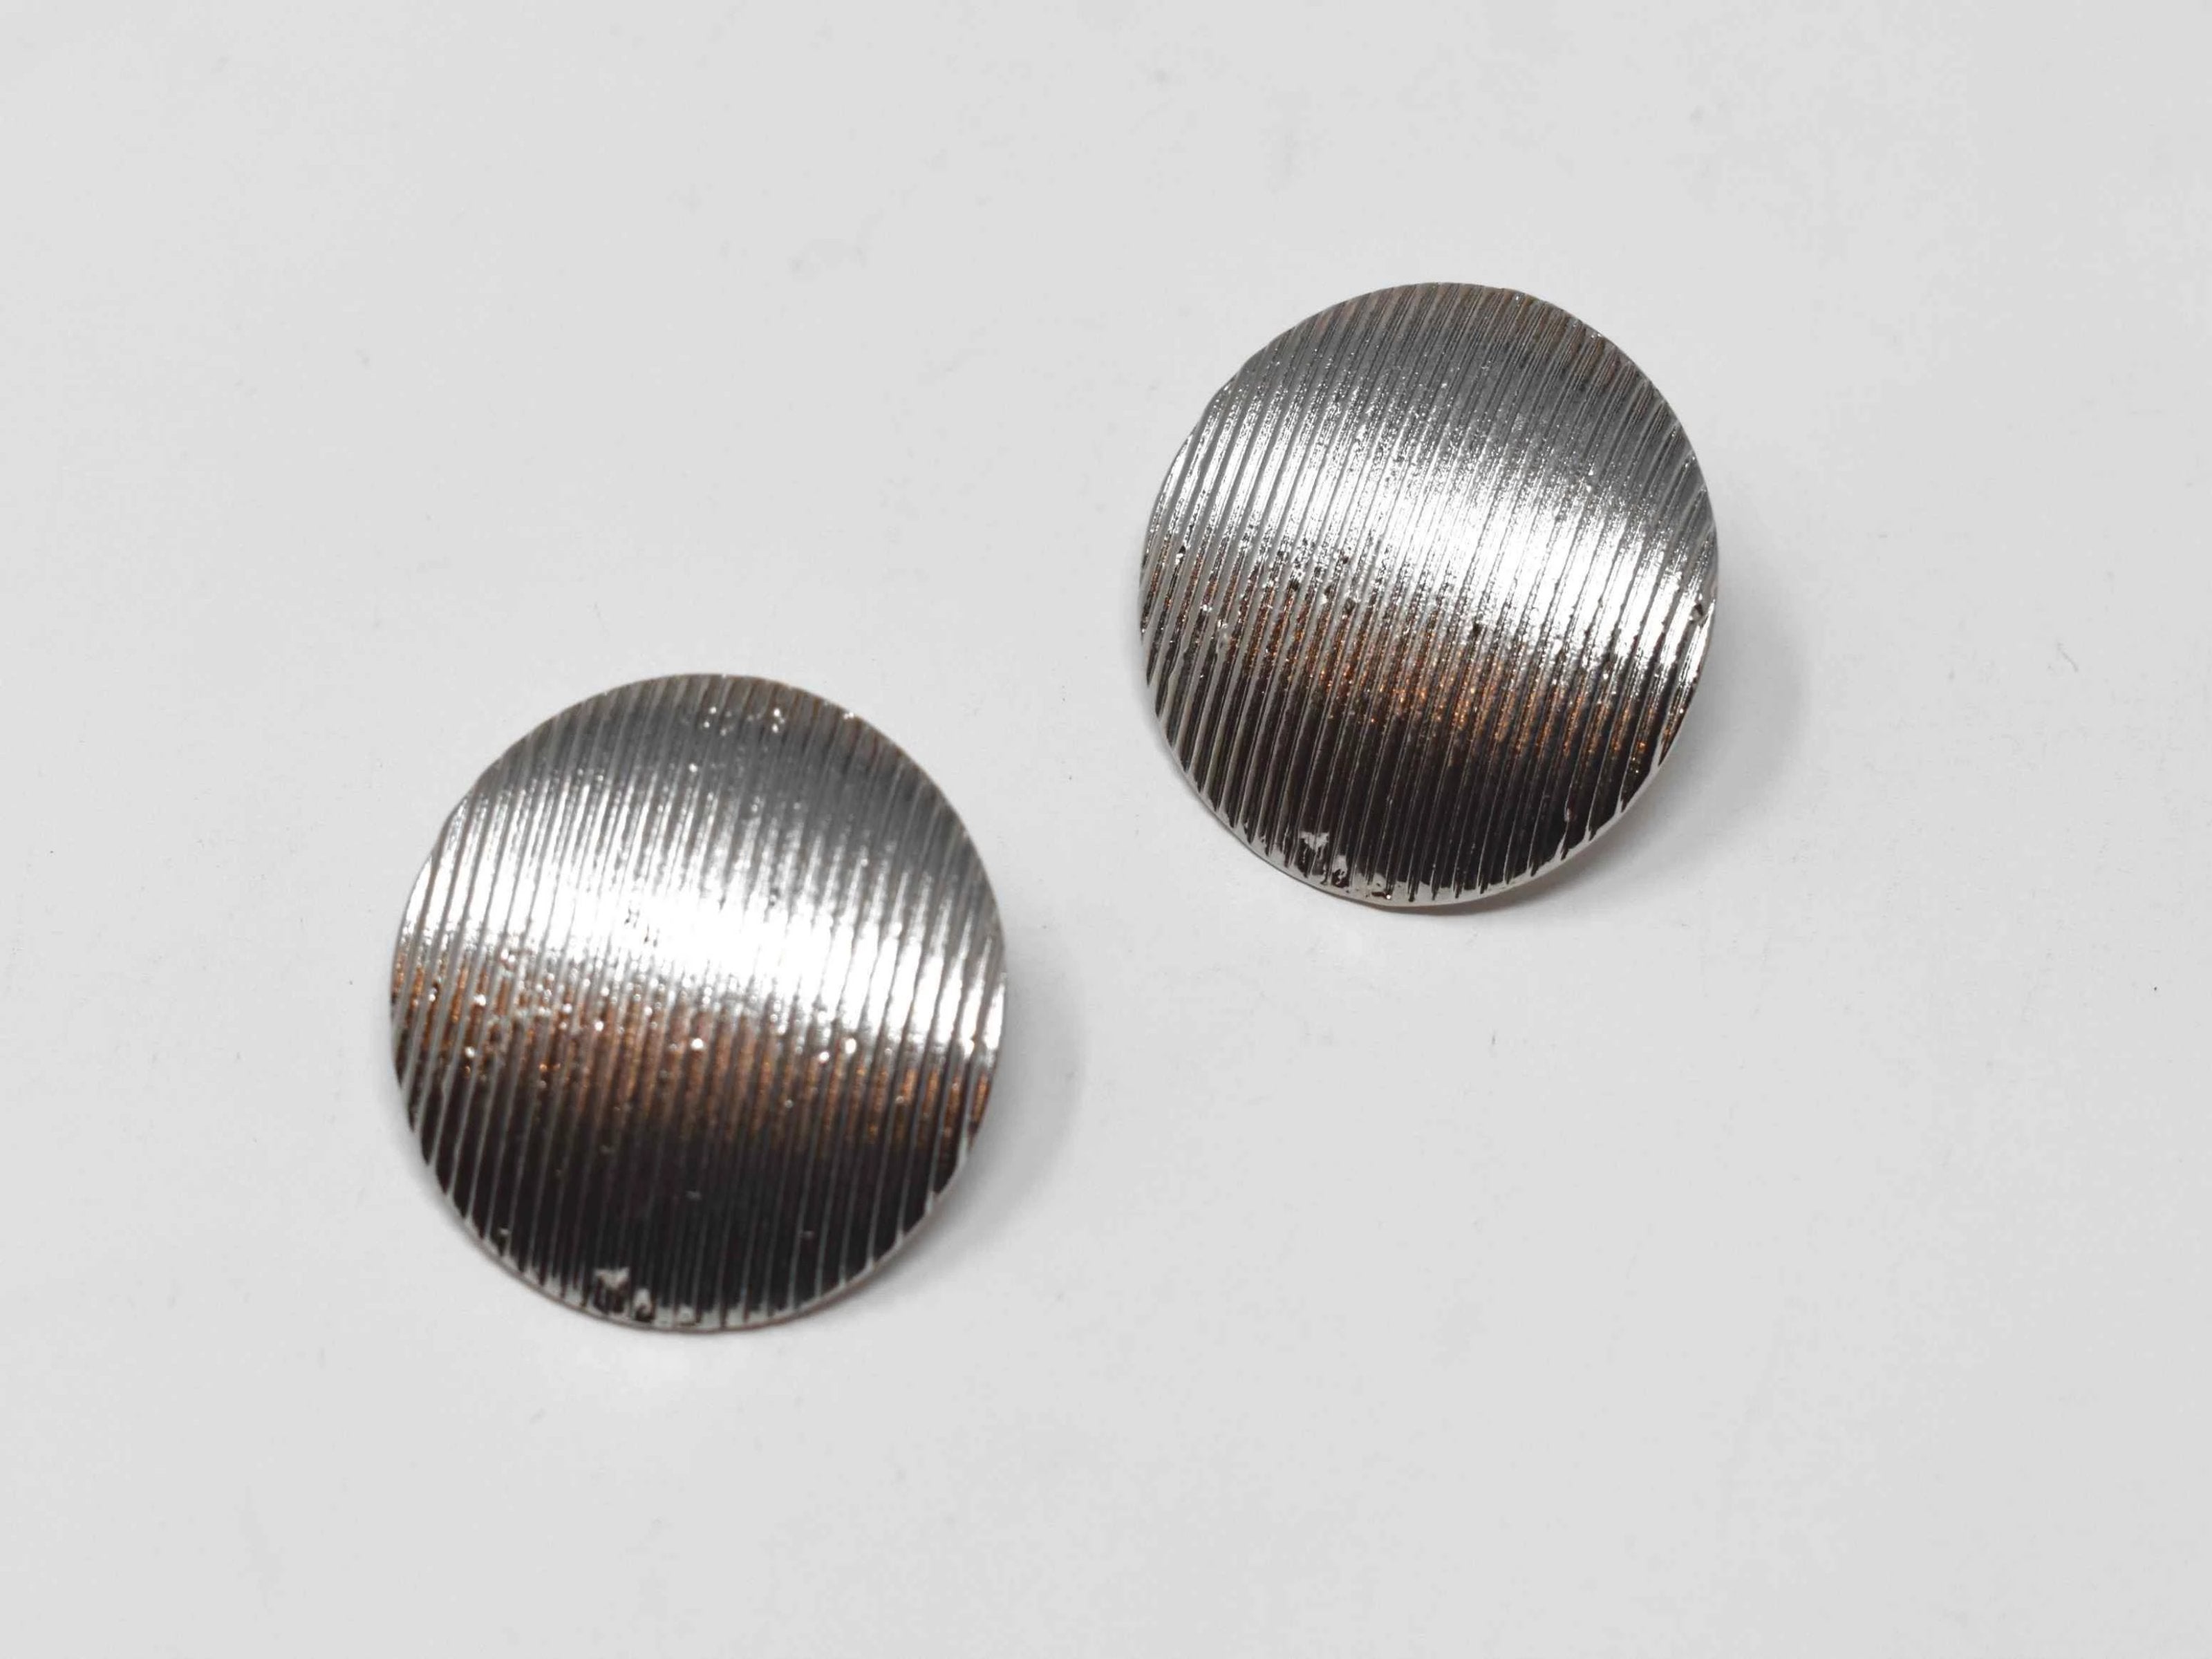 Our Dahli Silver earrings are good for any occasion. They are silver medium sized knob earrings with a pinstripe design and a pushback clasp.